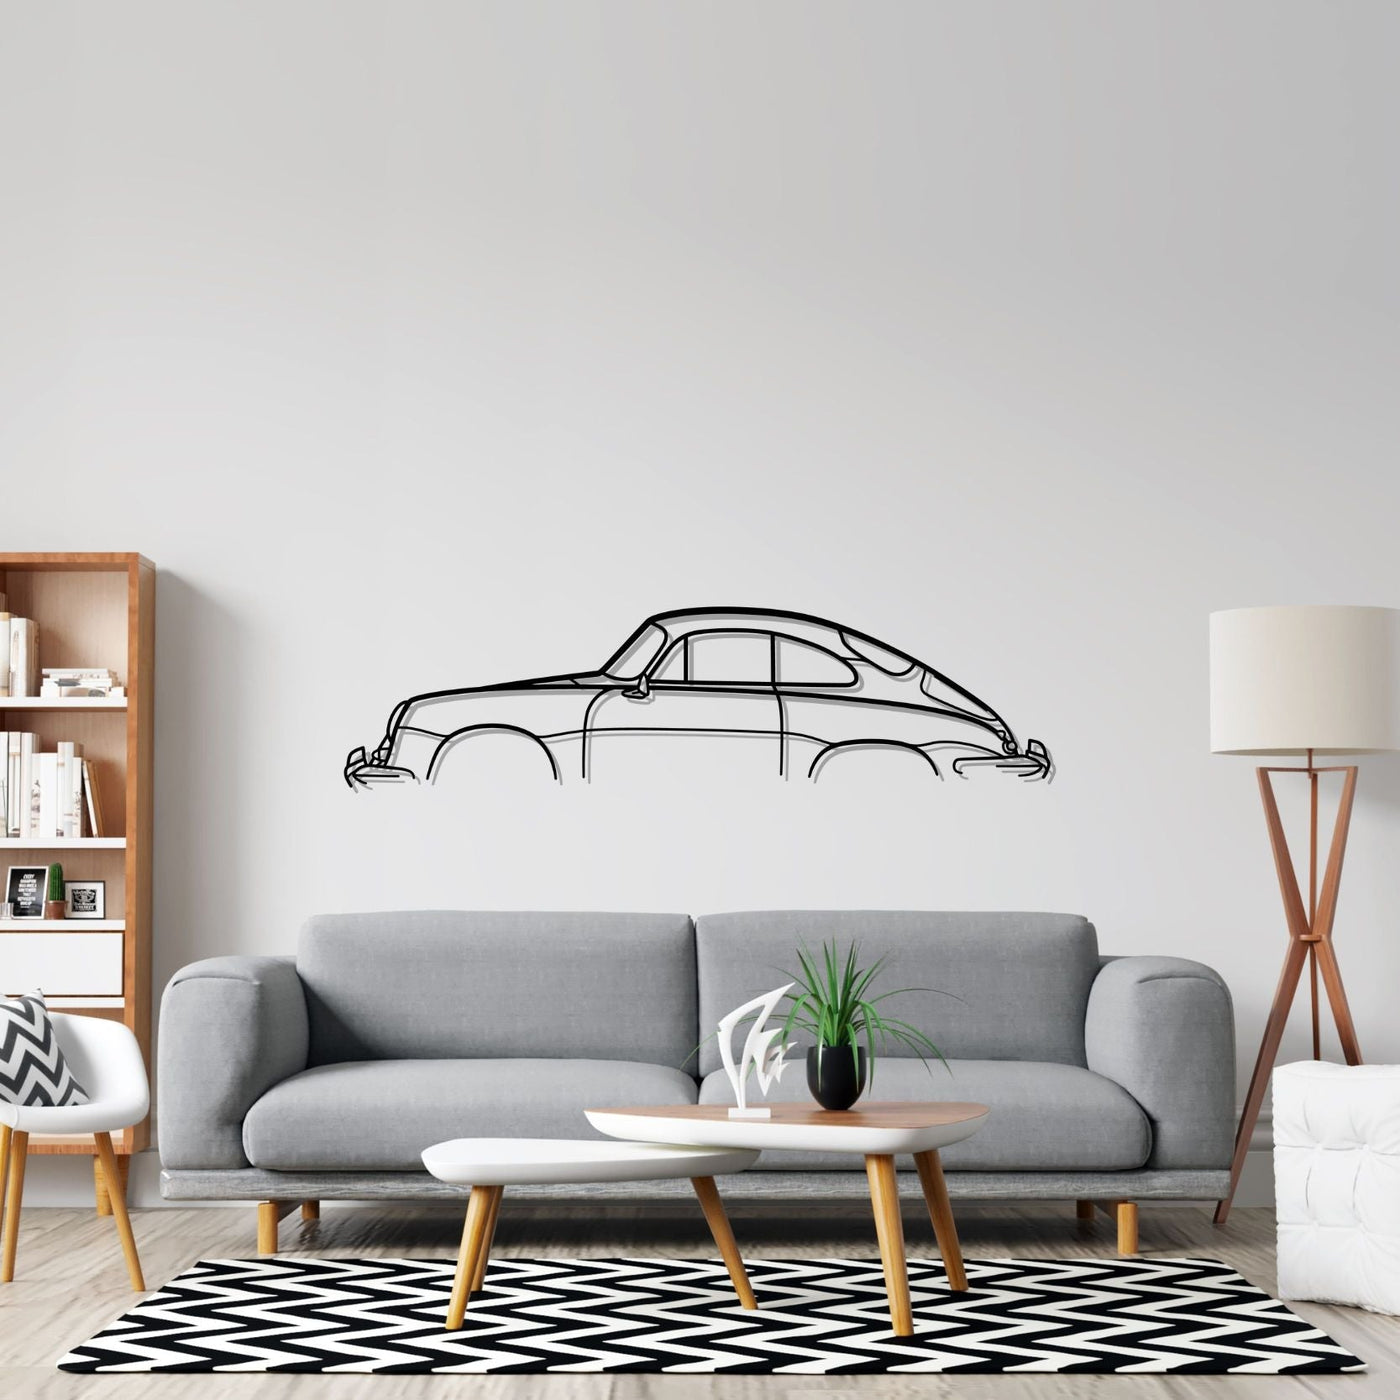 356 Coupe 1964 Classic Silhouette Metal Wall Art